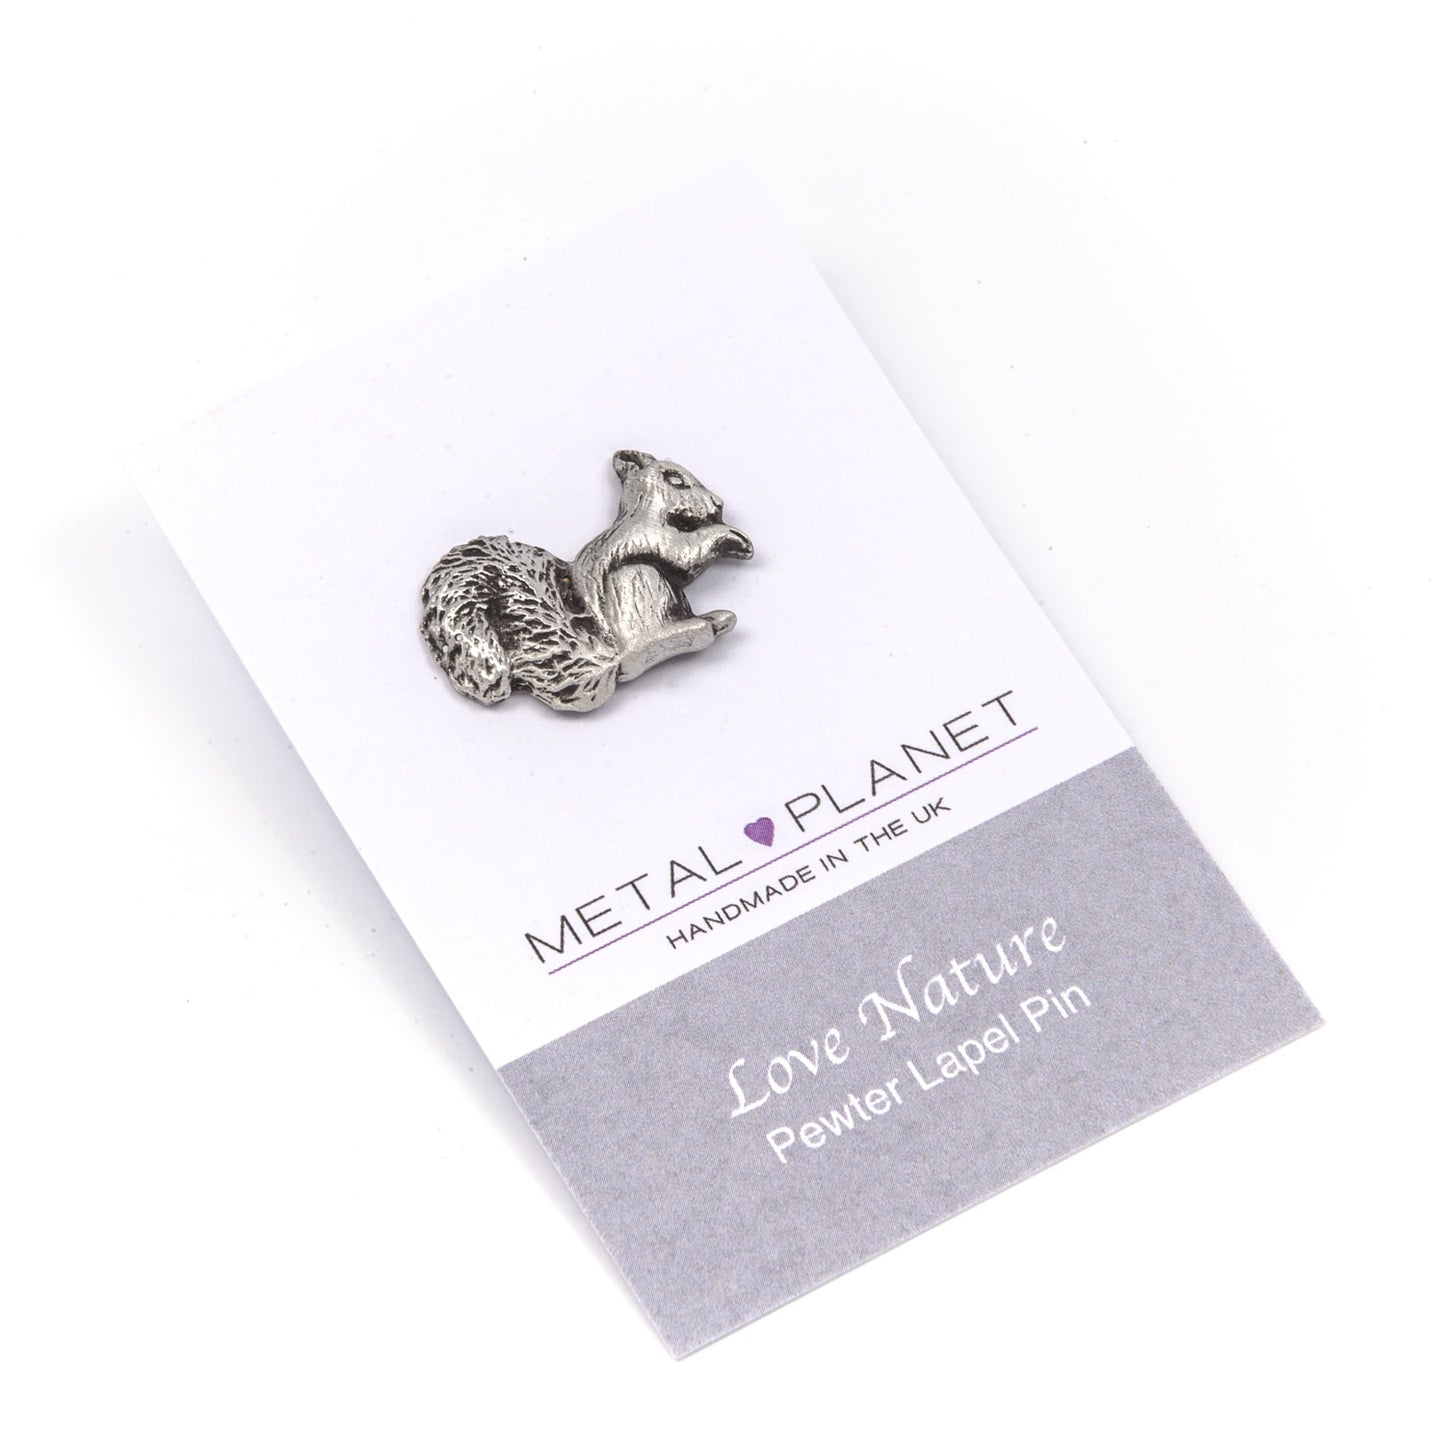 Animal & Nature themed lapel pins